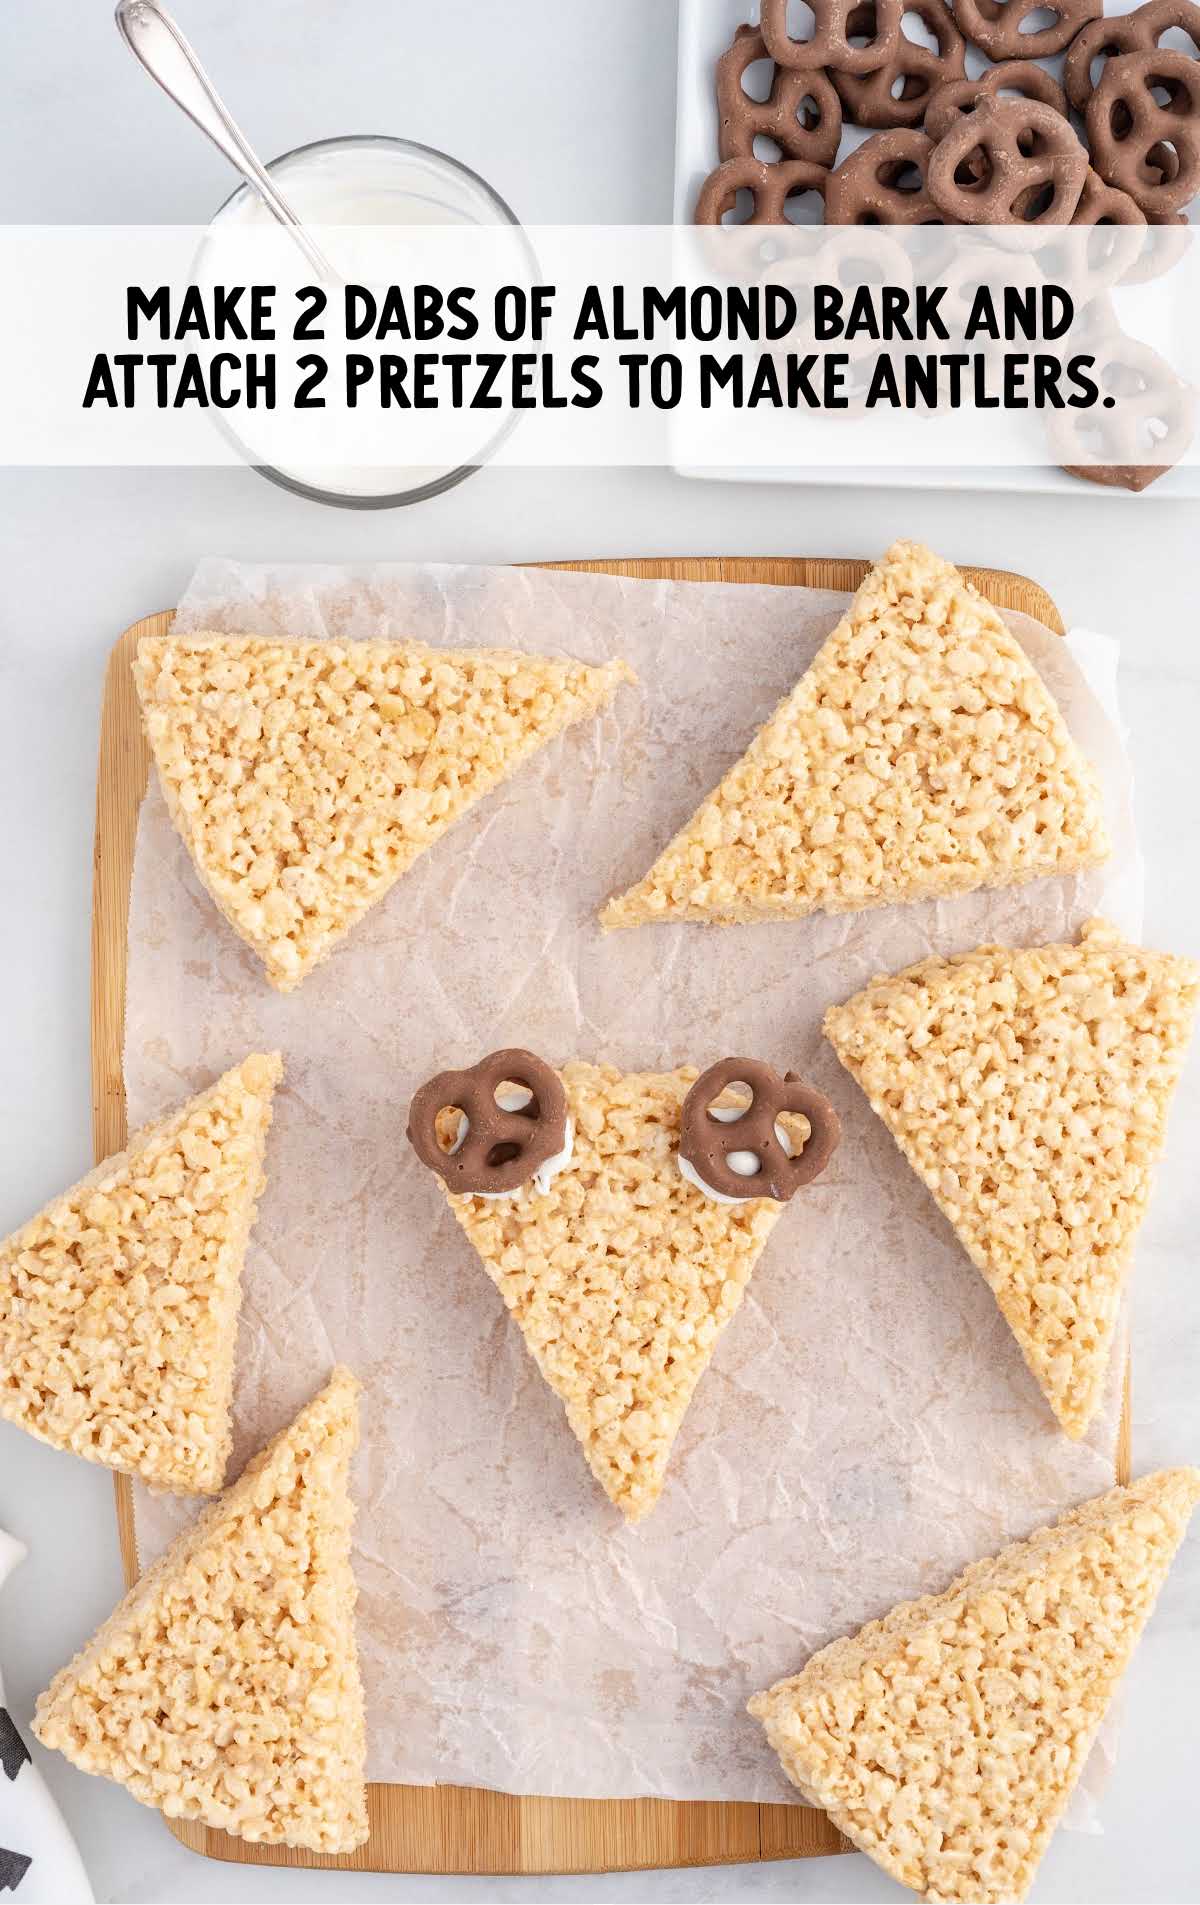 using almond bark attach pretzel to make antlers on a wooden board